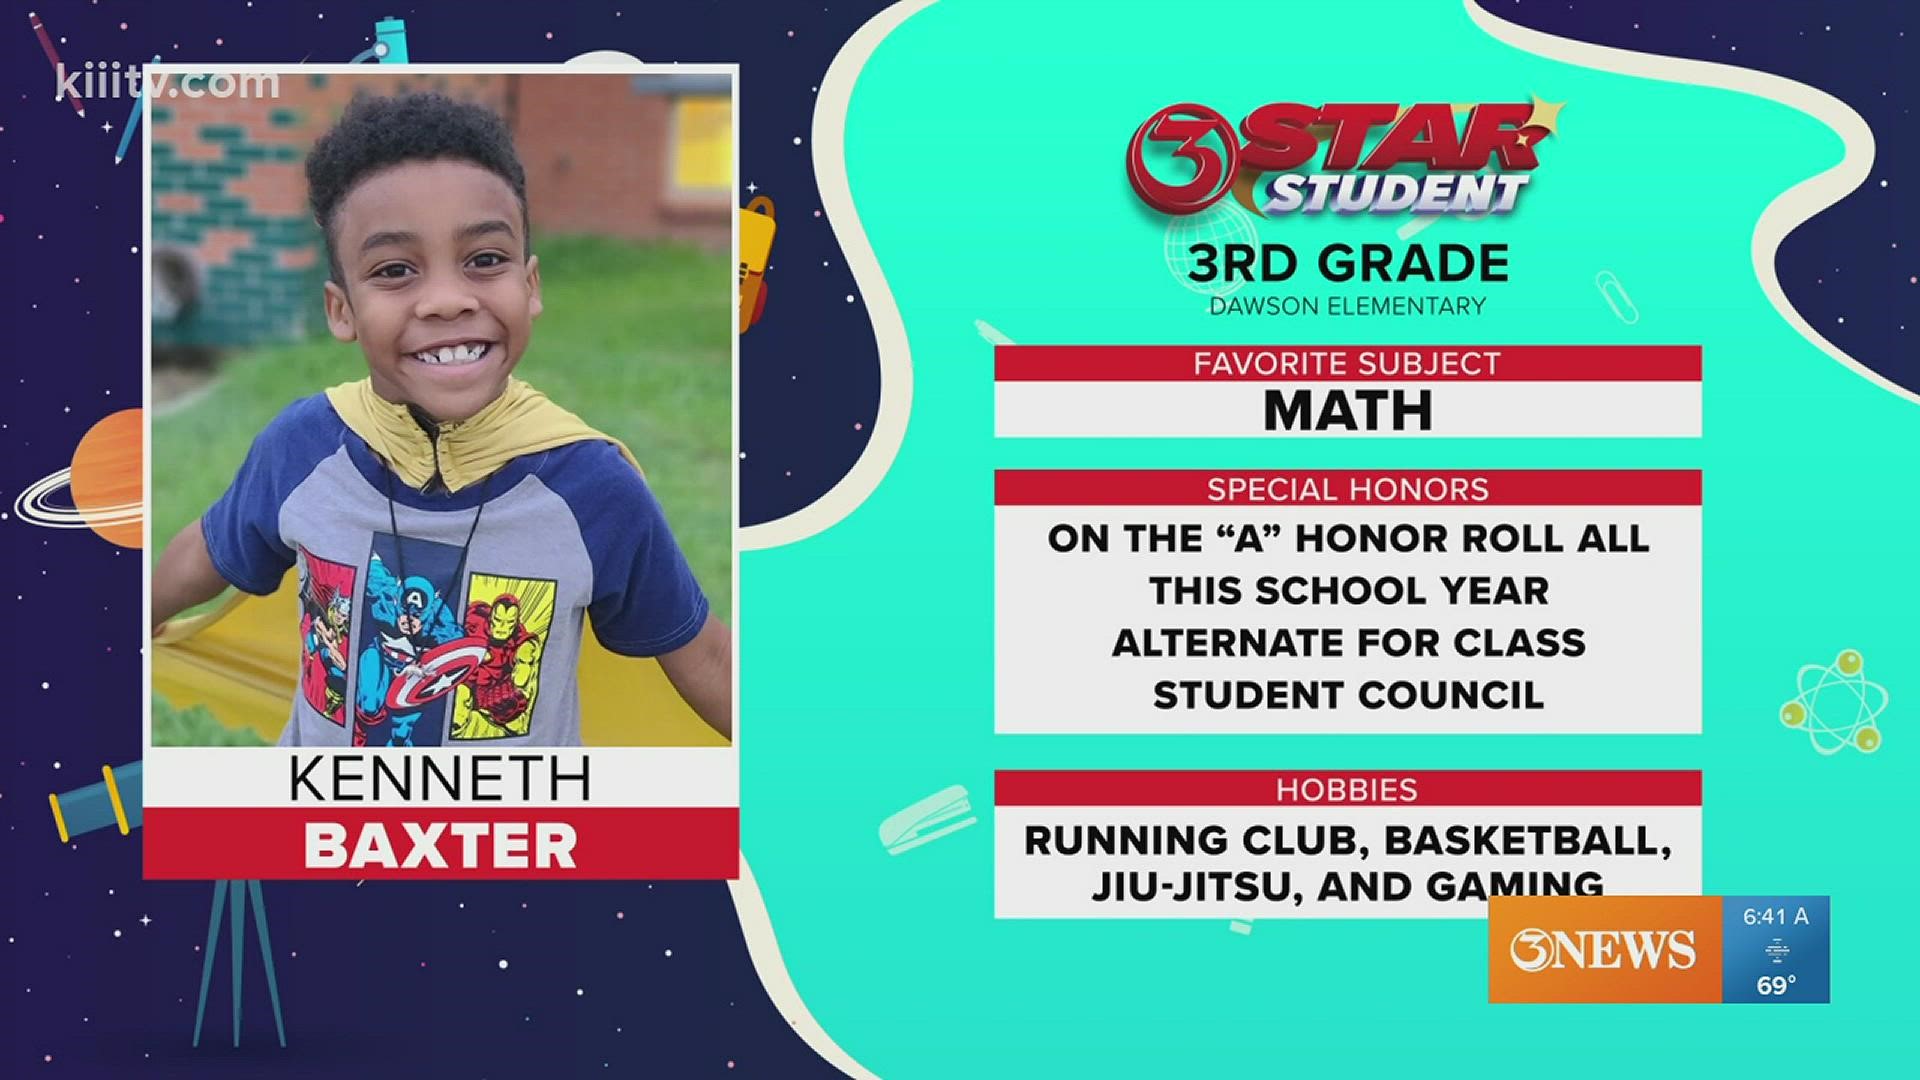 Kenneth Baxter has been on the "A" honor roll all year!